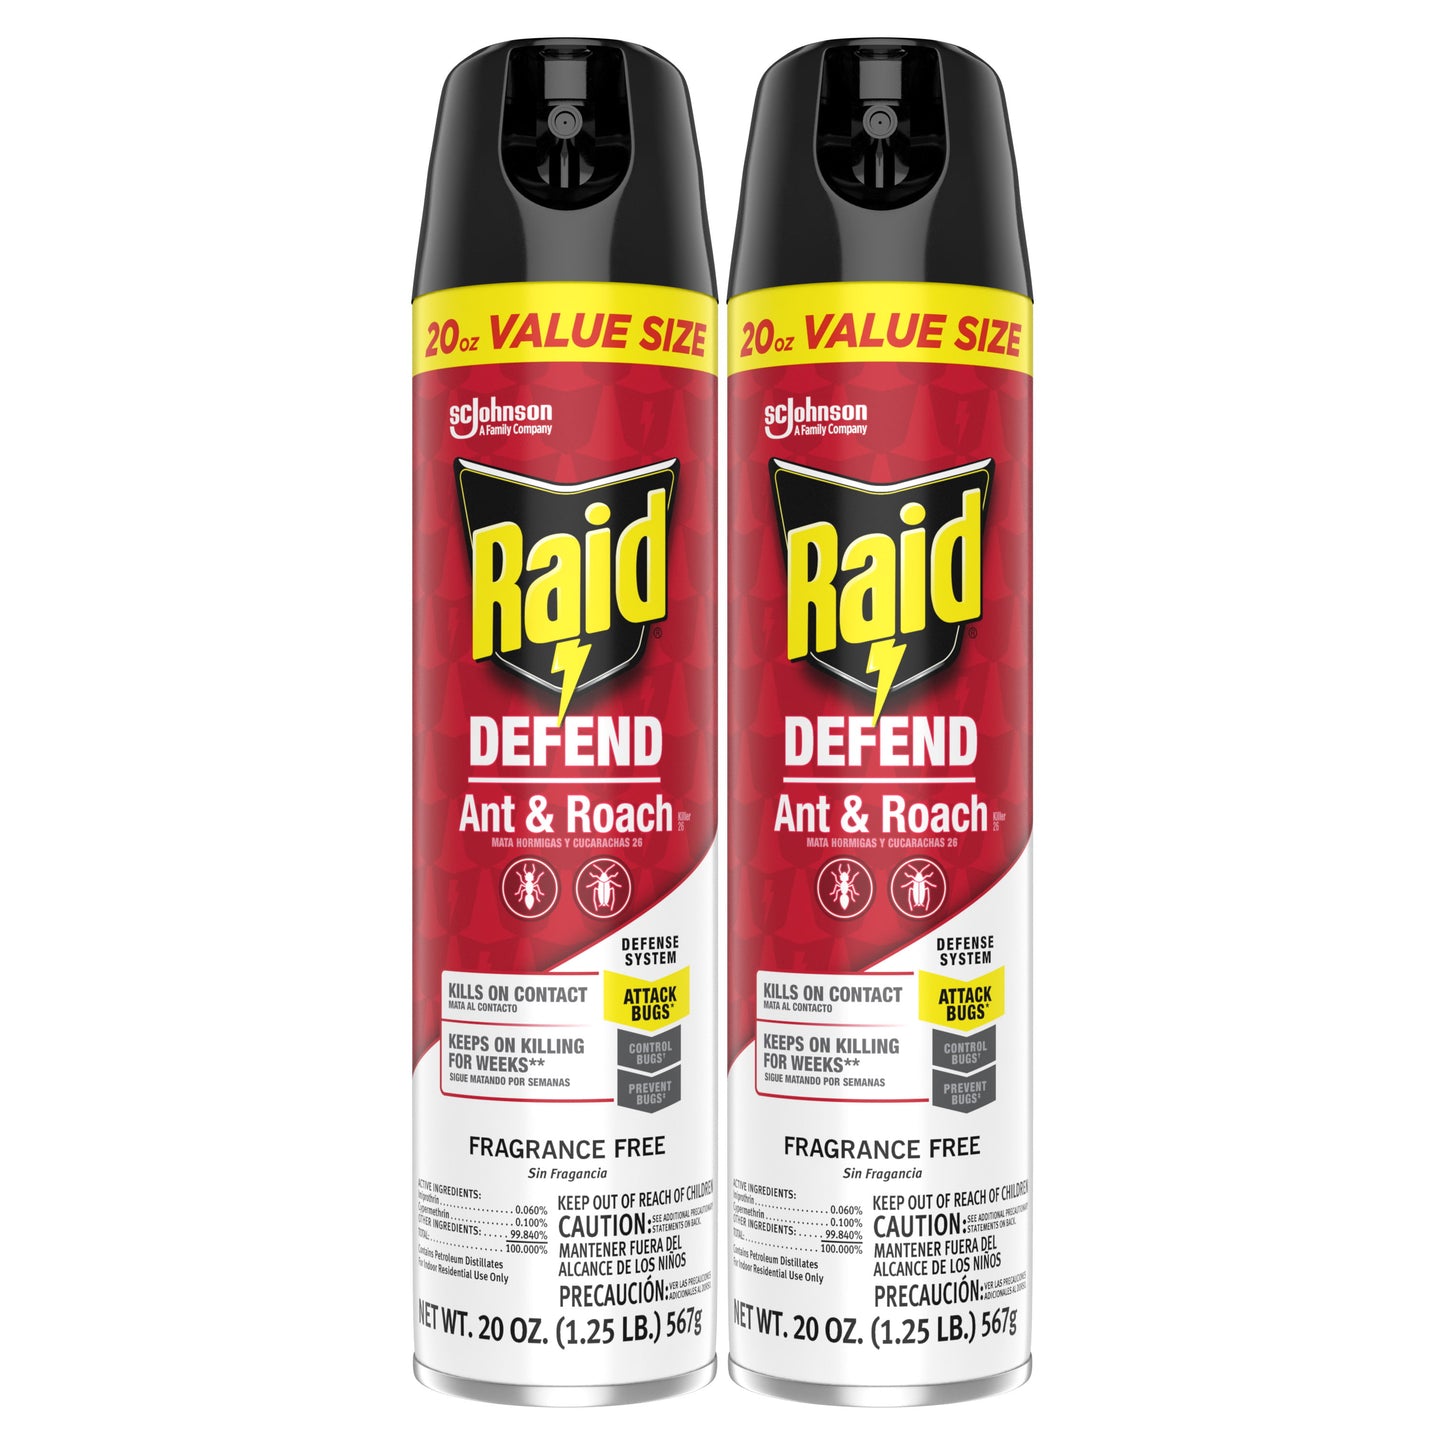 Raid Defend Ant and Roach Killer, Insect Killer Spray, Fragrance-Free, 20 oz, 2 Count